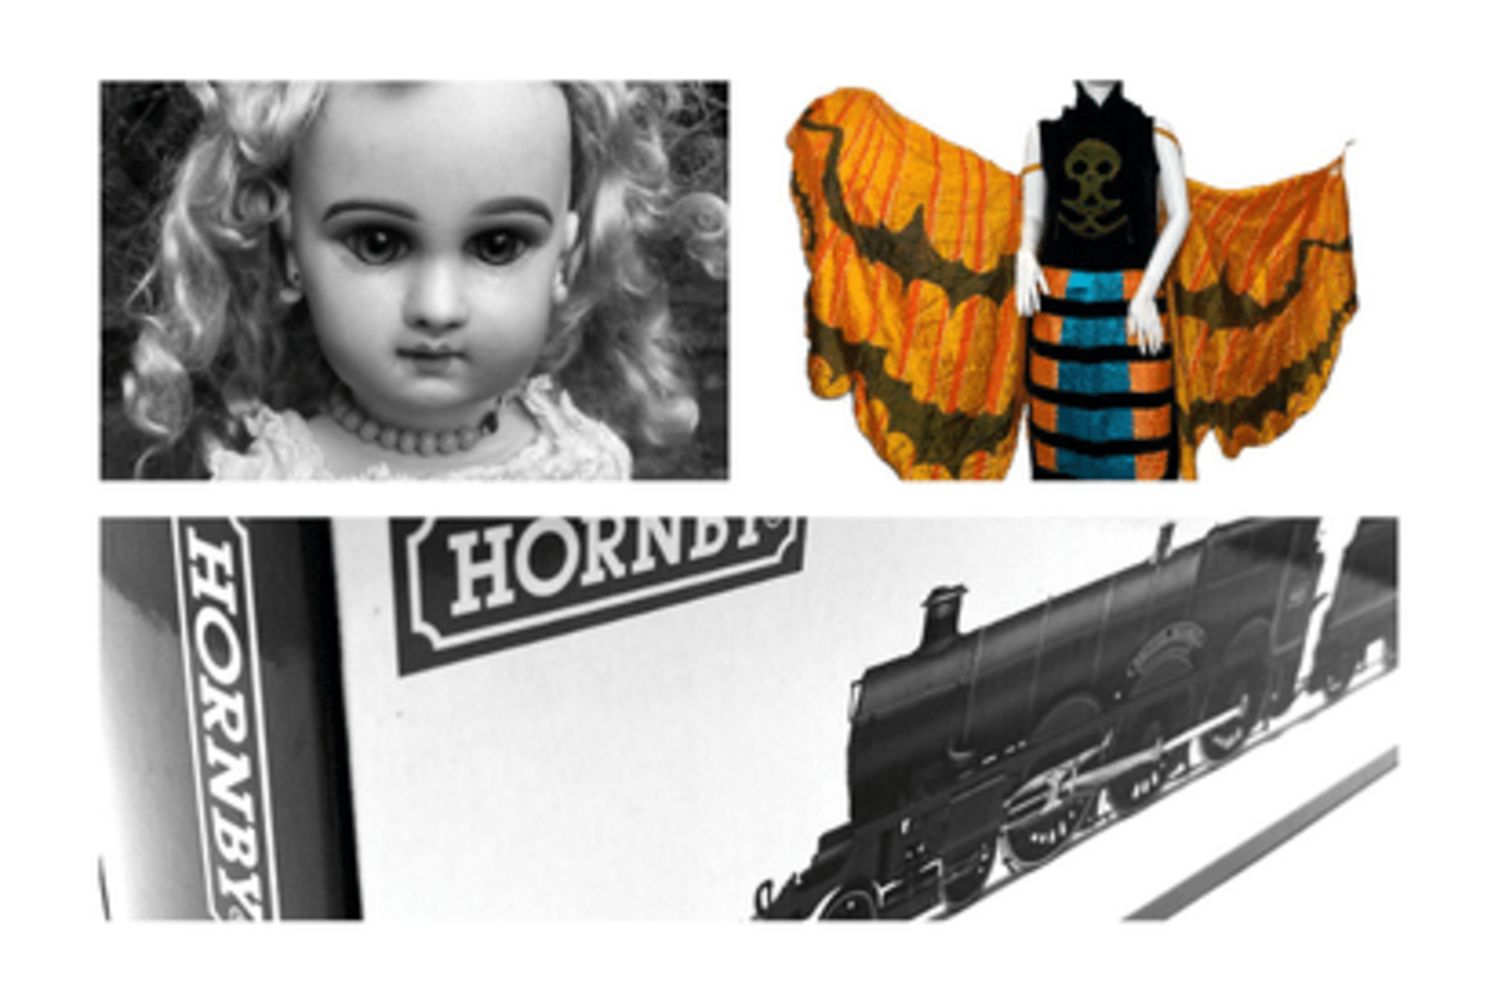 BISHTON HALL TOYS, DOLLS, TEDDY BEARS, MODEL RAILWAY COLLECTION: COSTUME, TEXTILES & ACCESSORIES